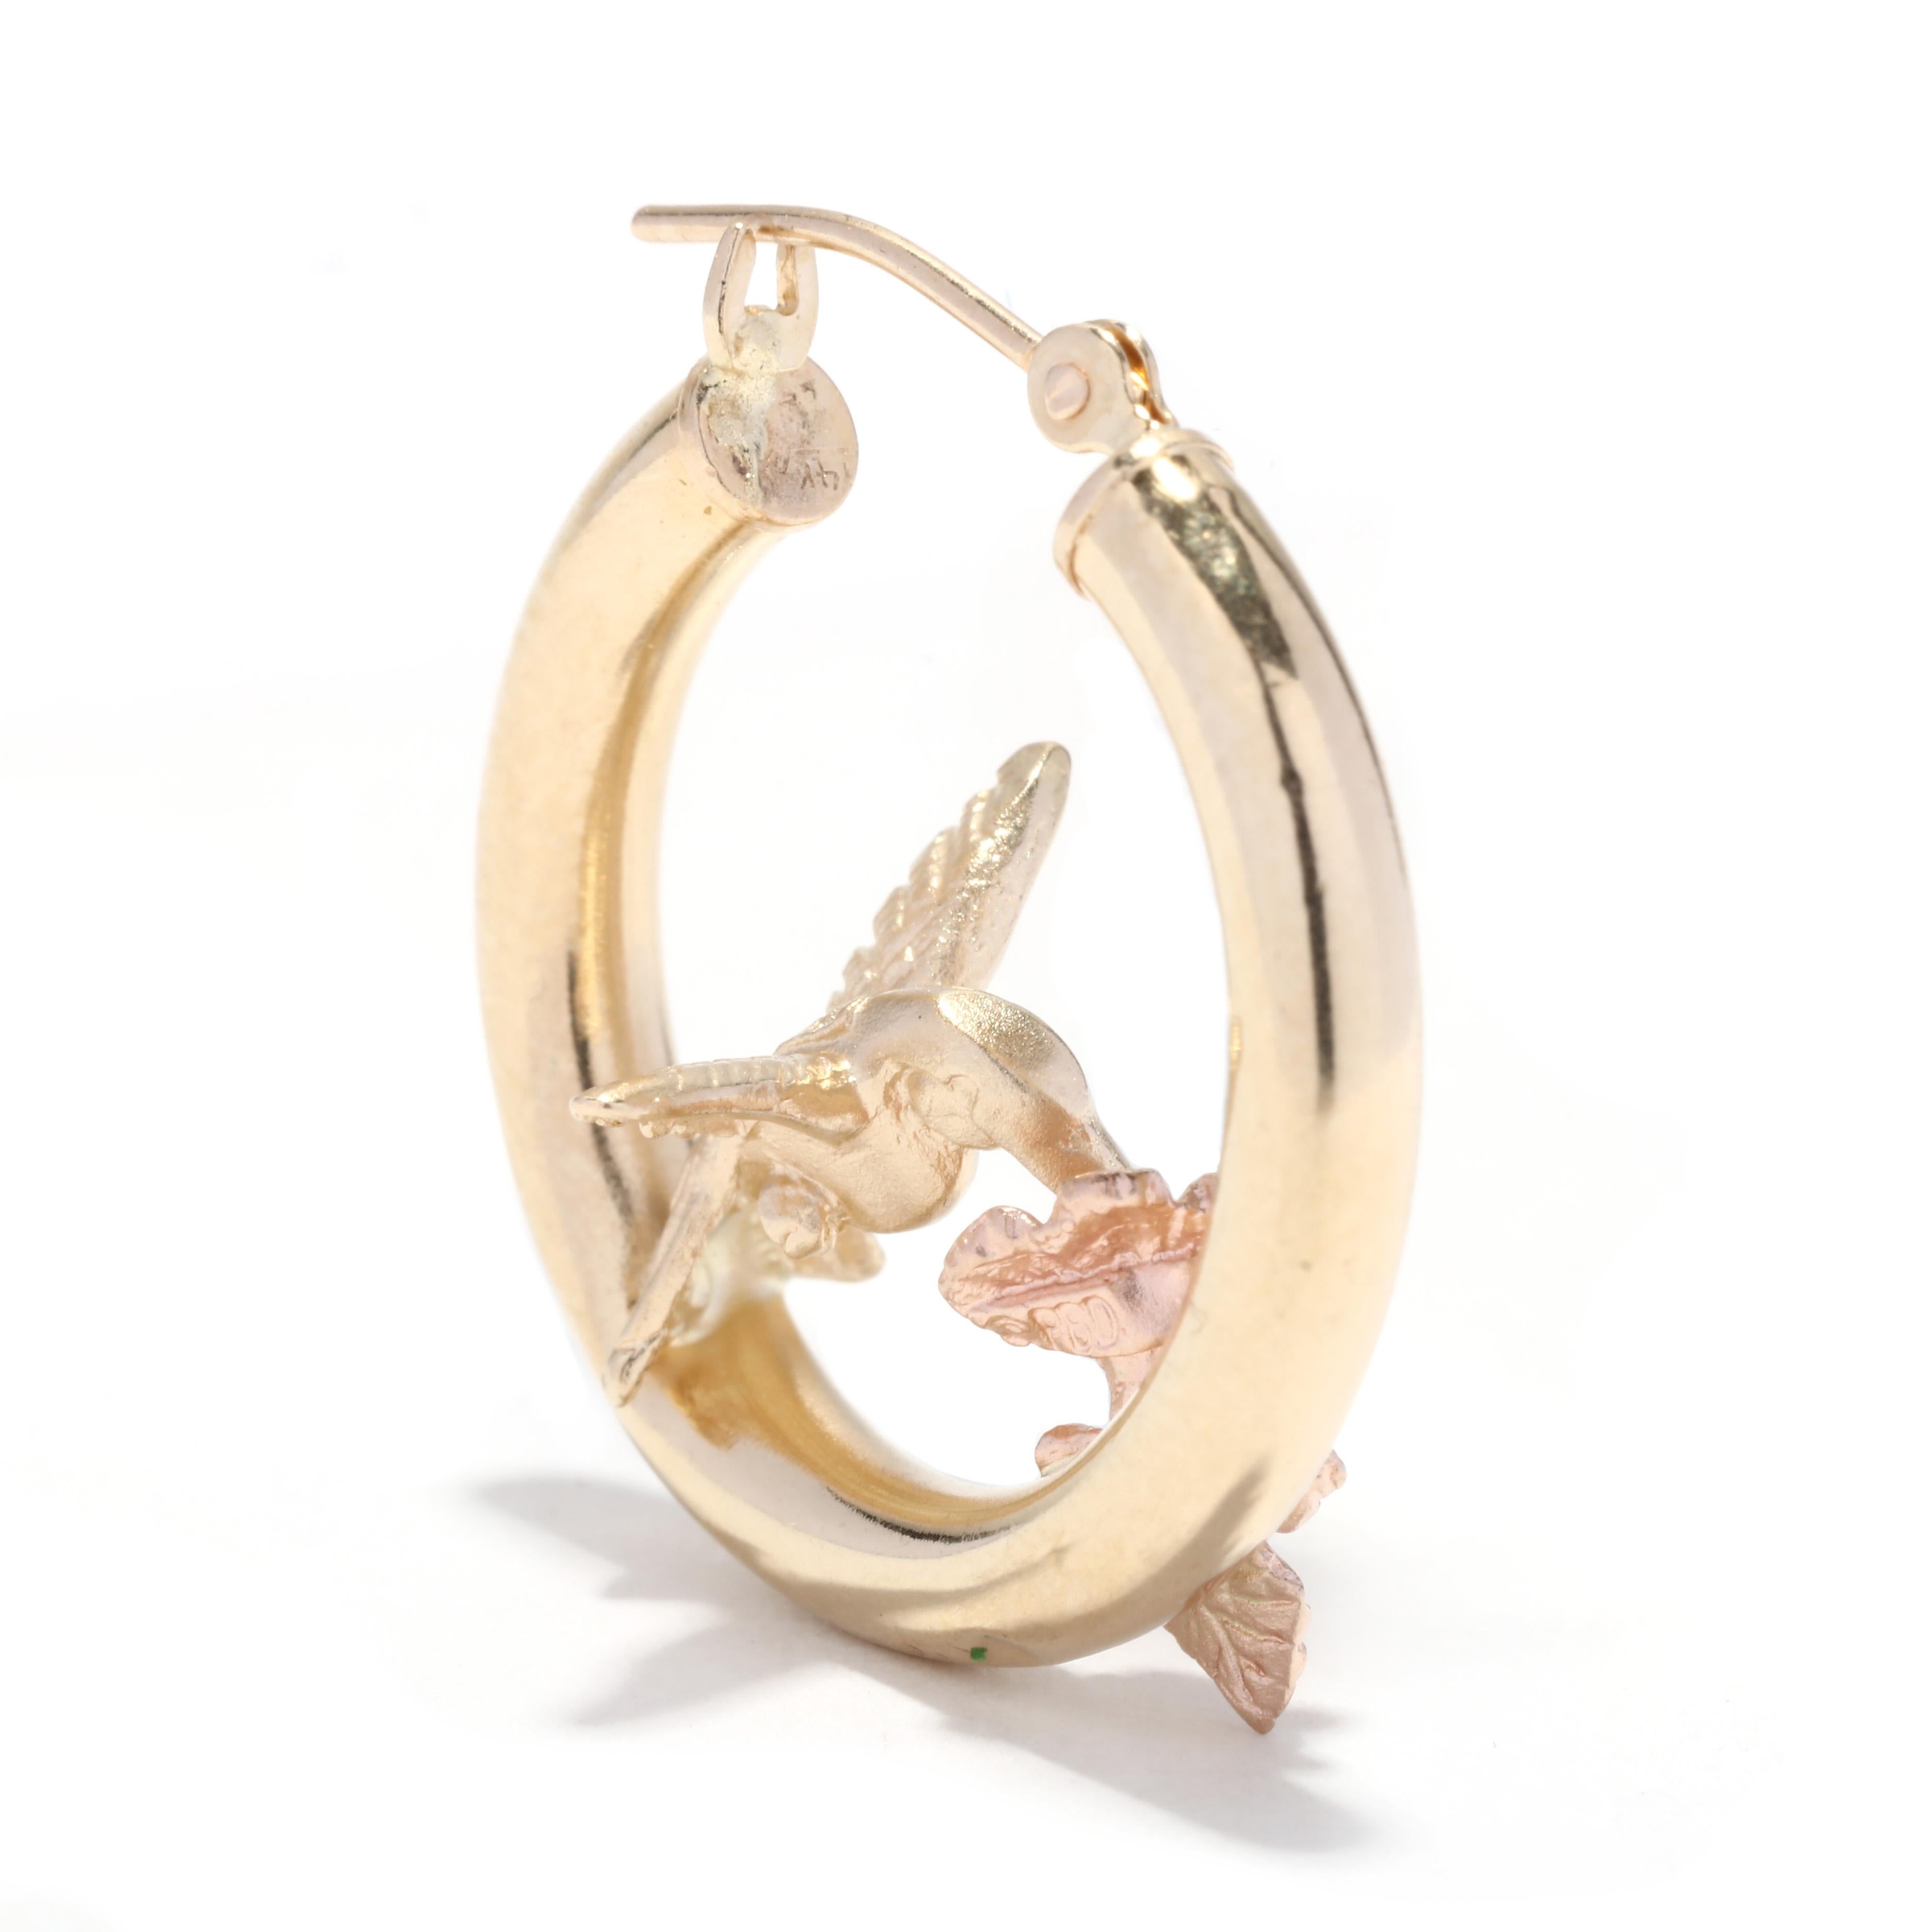 A vintage 14 karat yellow rose gold hummingbird hoop earrings. These earrings feature small tube hoops with 3D hummingbird sitting atop and with a floral detail.

Length: 7/8 in.

Tube Width: 3 mm

Weight: 2.5 dwts. / 3.89 grams

Stamps: 14K


Ring